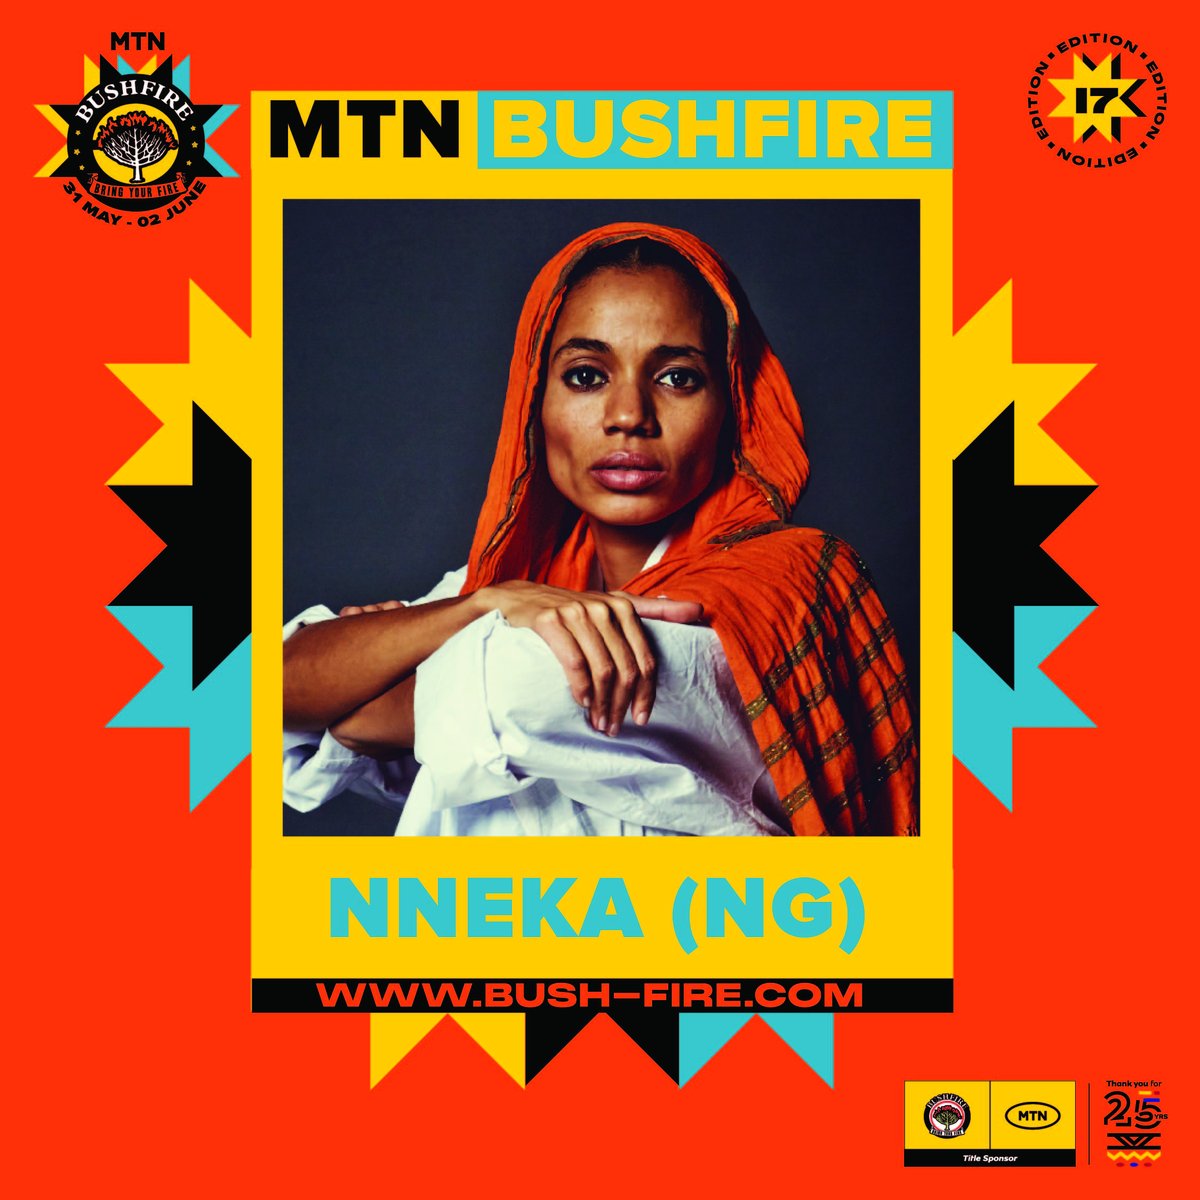 Headlining this year’s festival is one of the continent’s most powerful voices, Nigerian global music sensation, Nneka with her electrifying blend of Afrobeats, Soul and Reggae music. Tickets: bush-fire.com/tickets/ #BRINGYOURFIRE #MTNBUSHFIRE2024